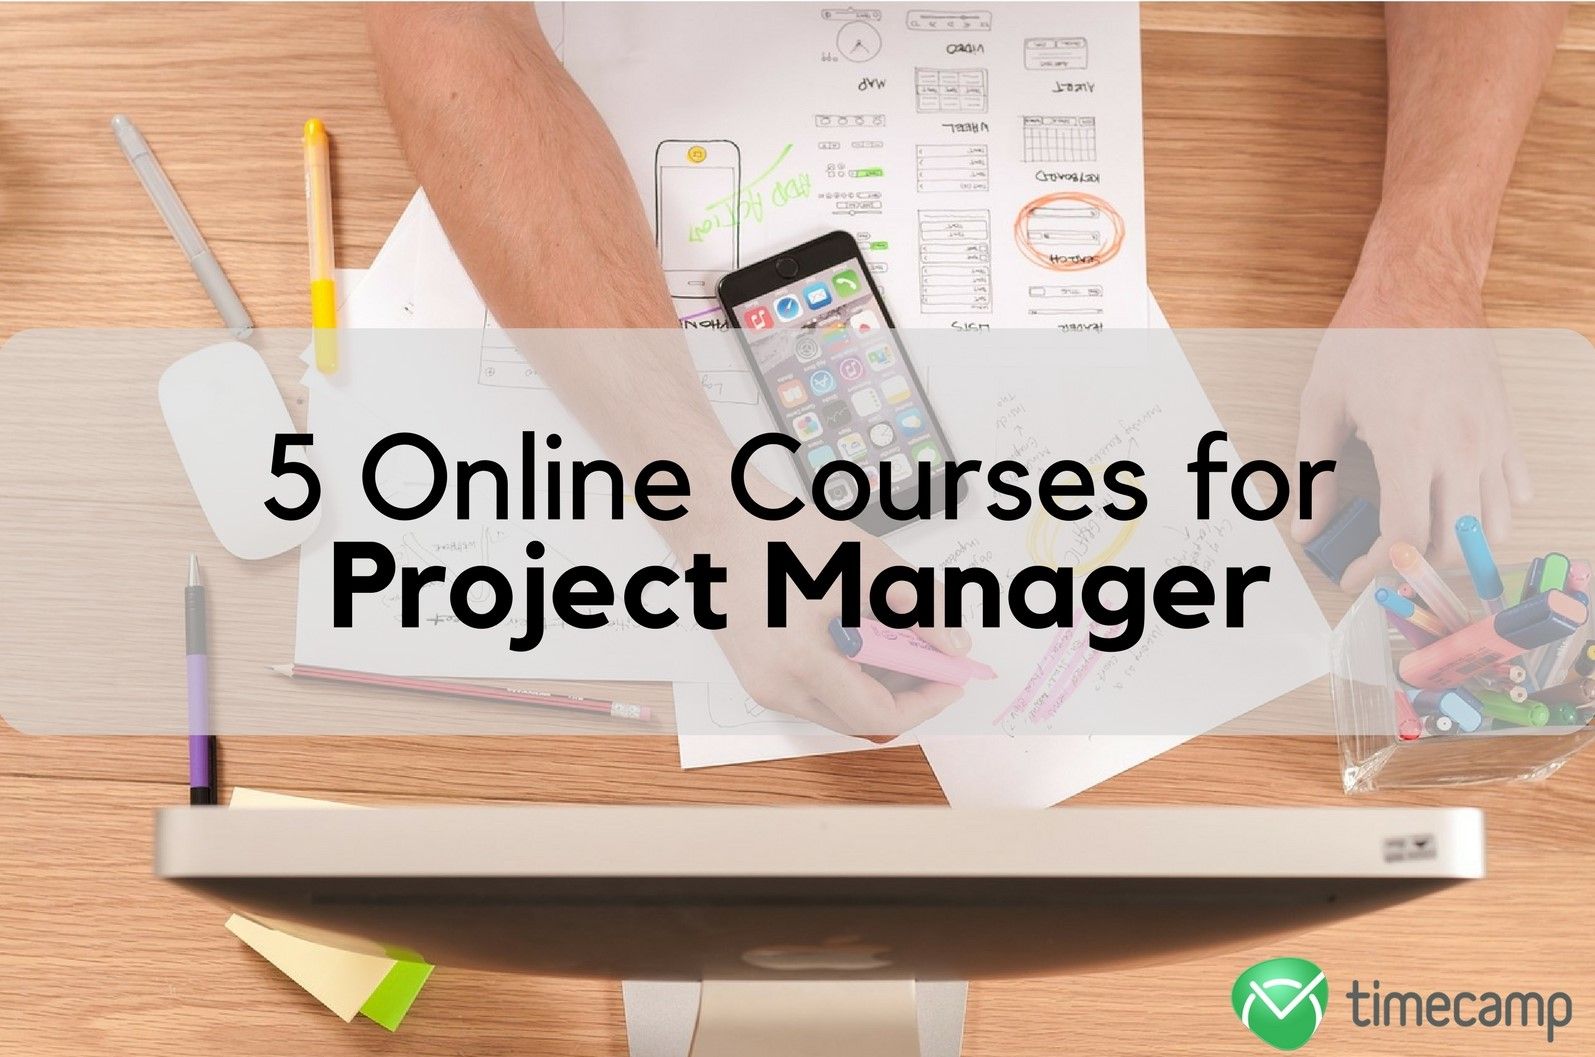 research project manager courses